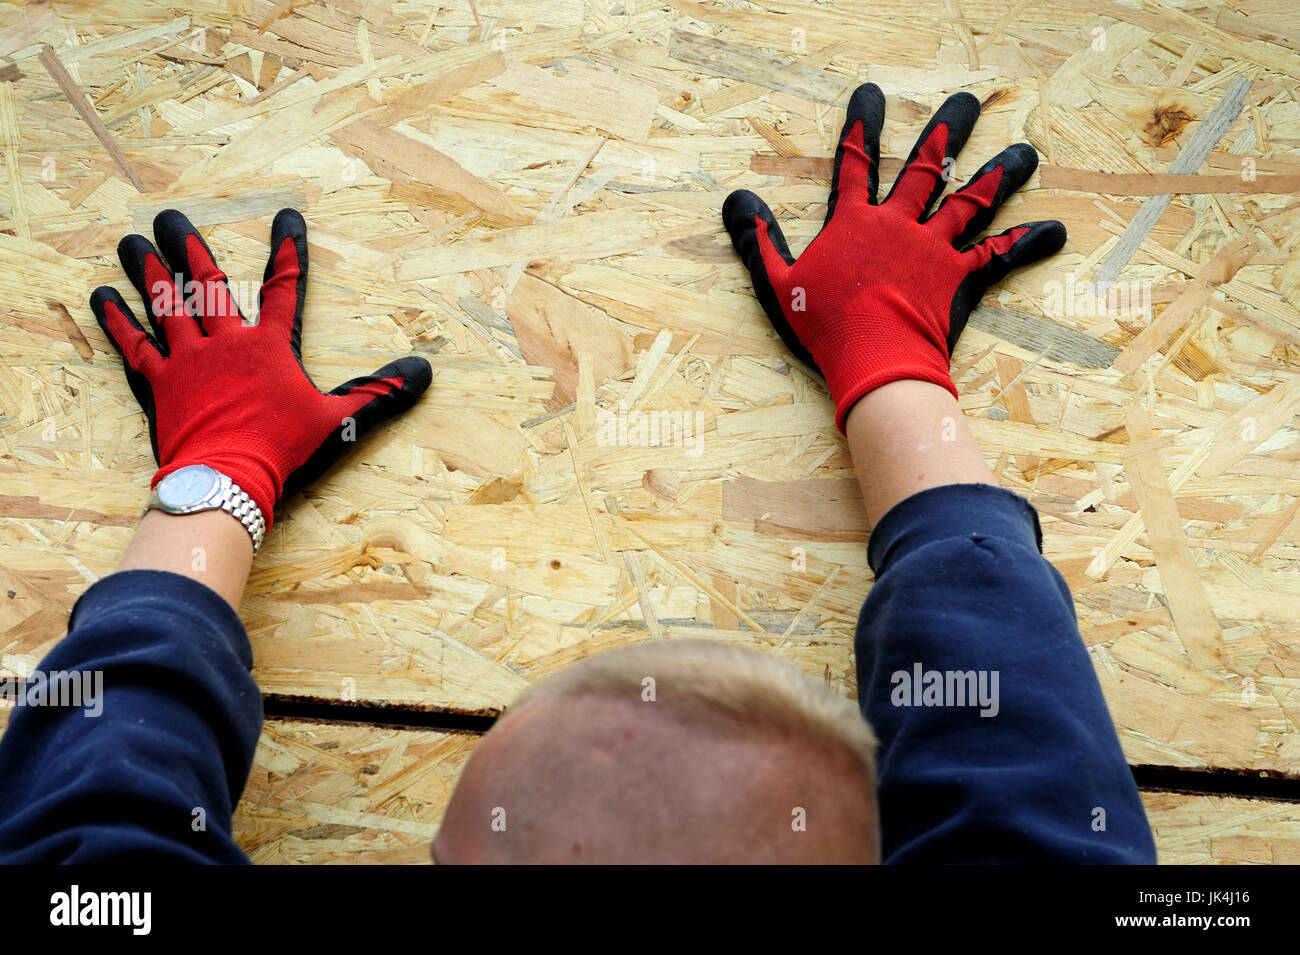 constructions, wood, wooden, work, walls, job, plates, human, people, practical, hands, safety, hygiene, keeps, Stock Photo